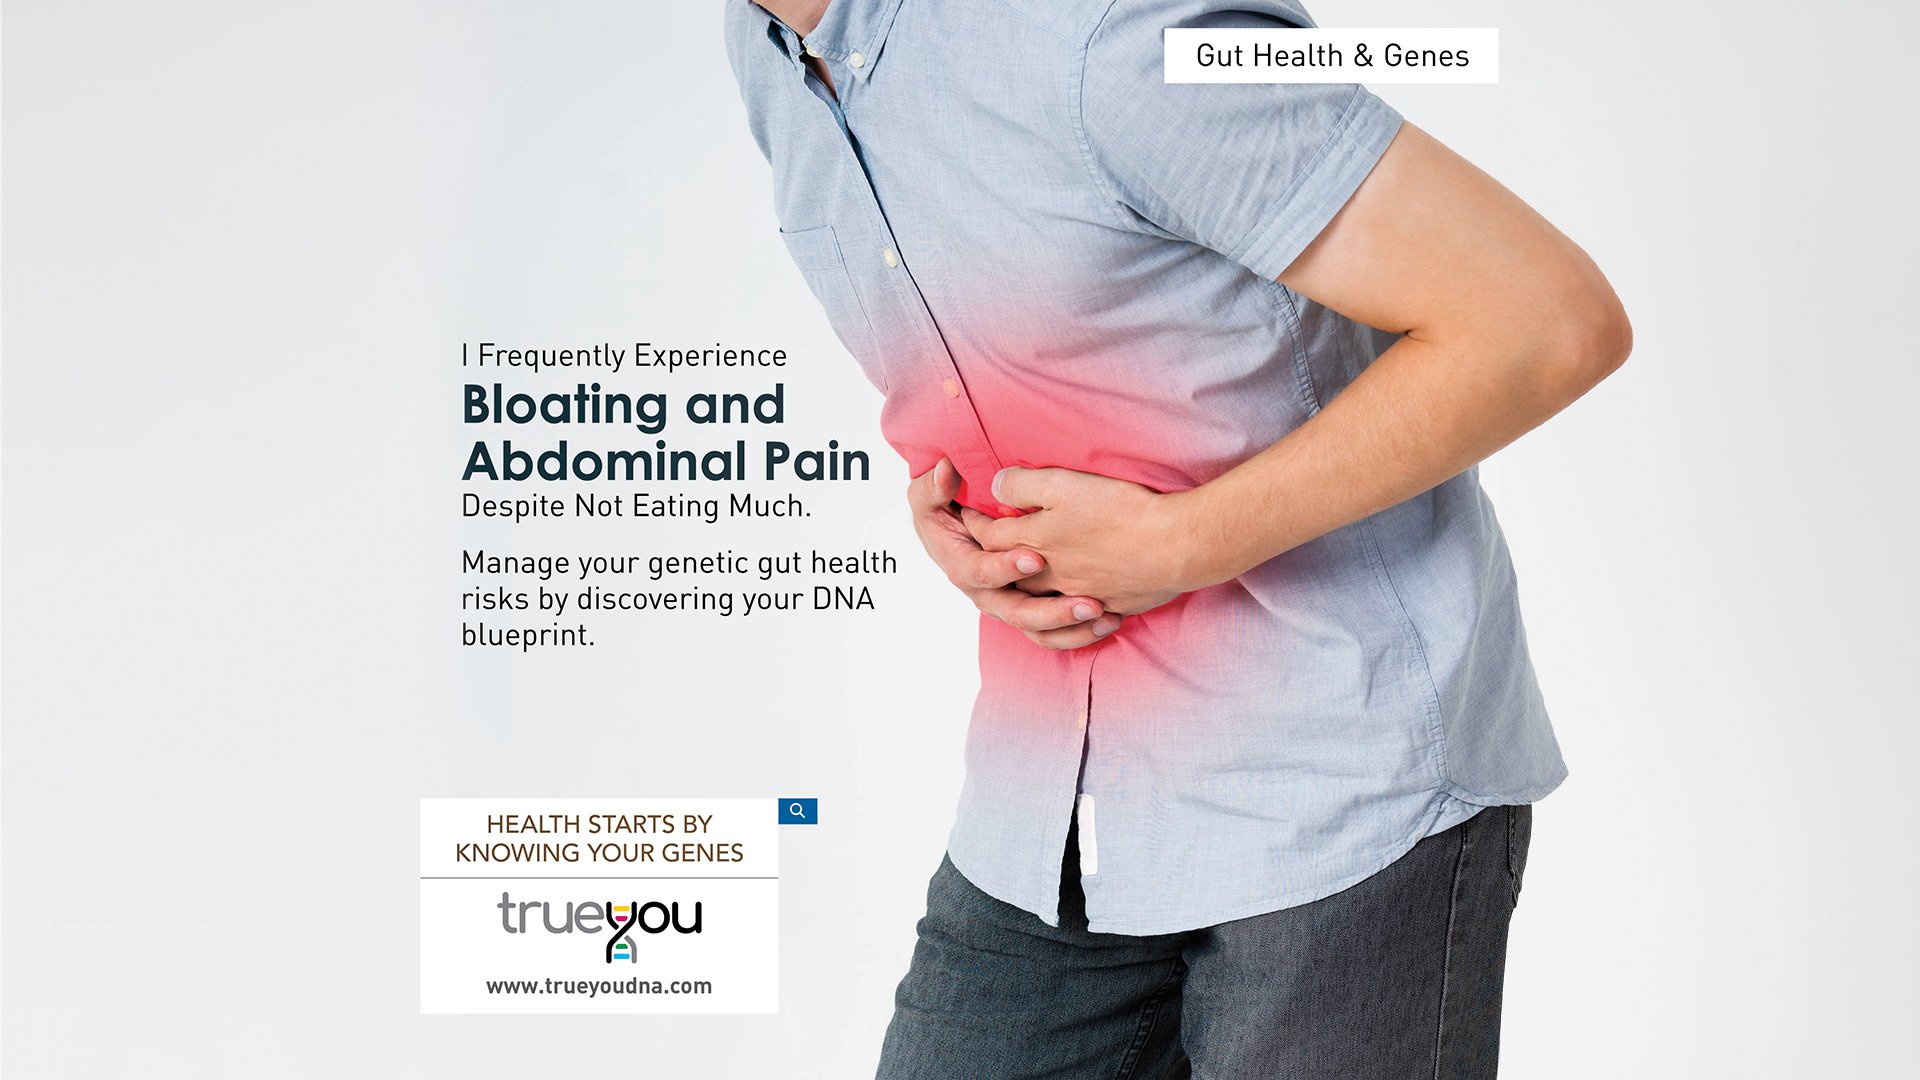 I frequently experience bloating and abdominal pain ...